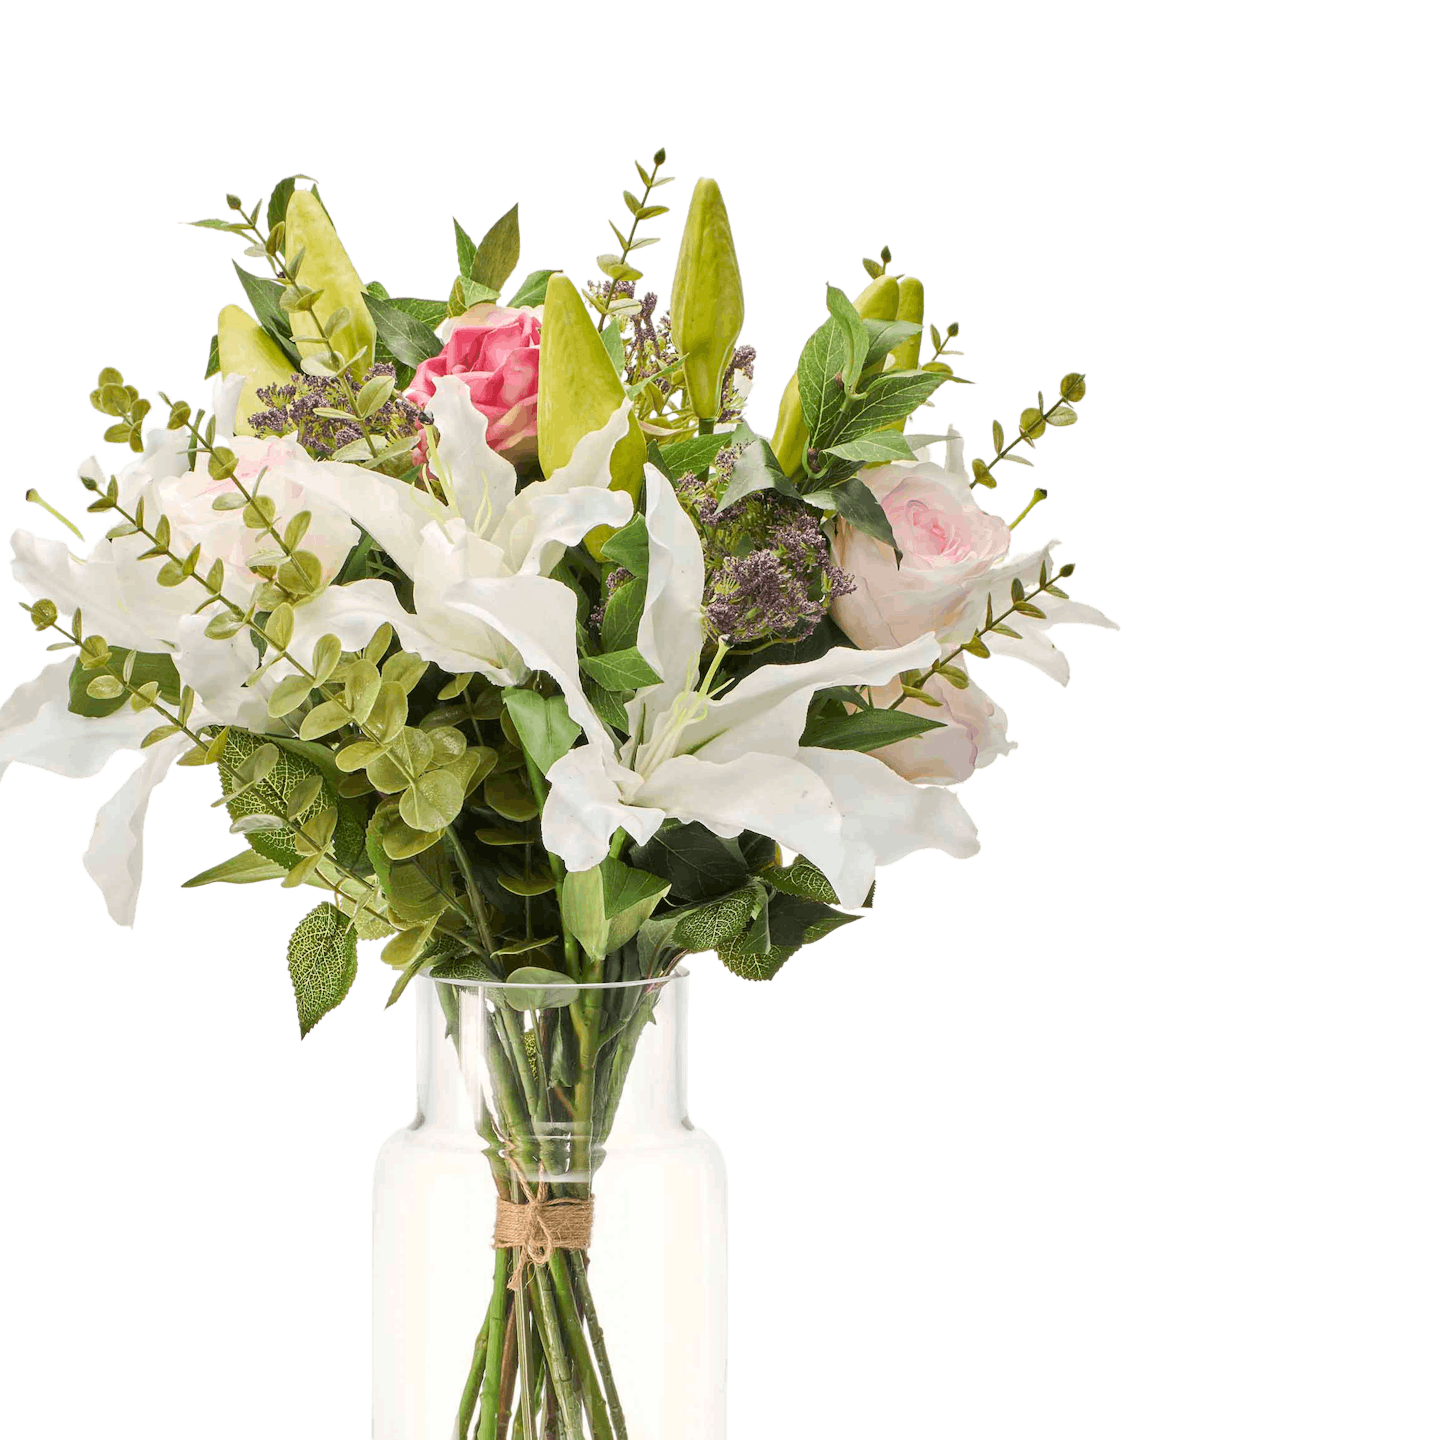 Artificial elegance bouquet in a glass vase